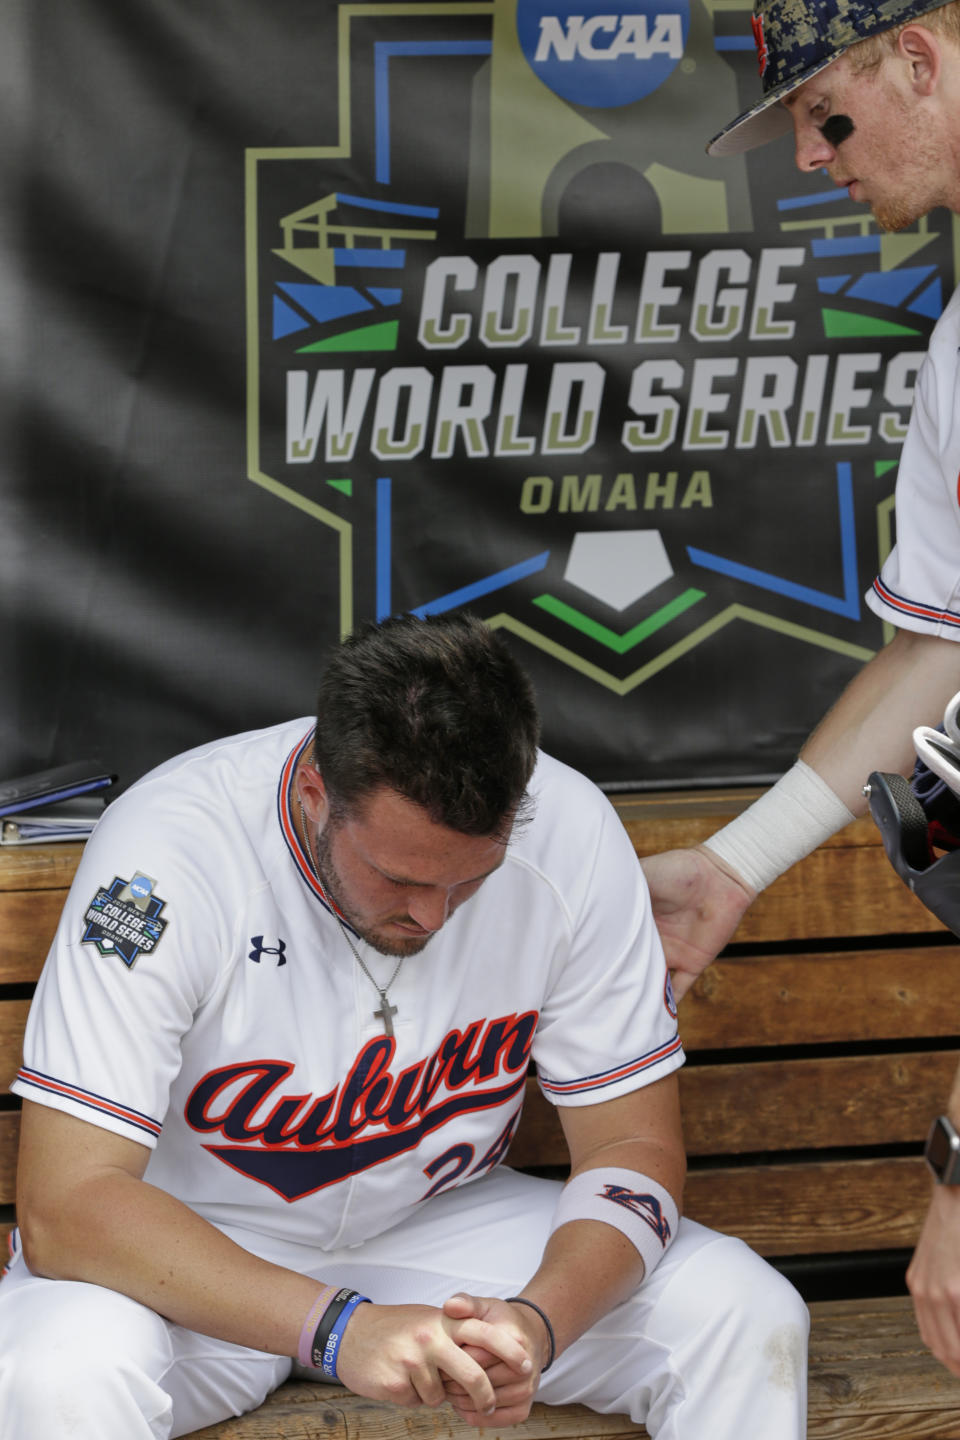 Auburn's Conor Davis (24) is comforted by a teammate in the dugout, following their 5-3 loss to Louisville, in an NCAA College World Series elimination baseball game in Omaha, Neb., Wednesday, June 19, 2019. (AP Photo/Nati Harnik)